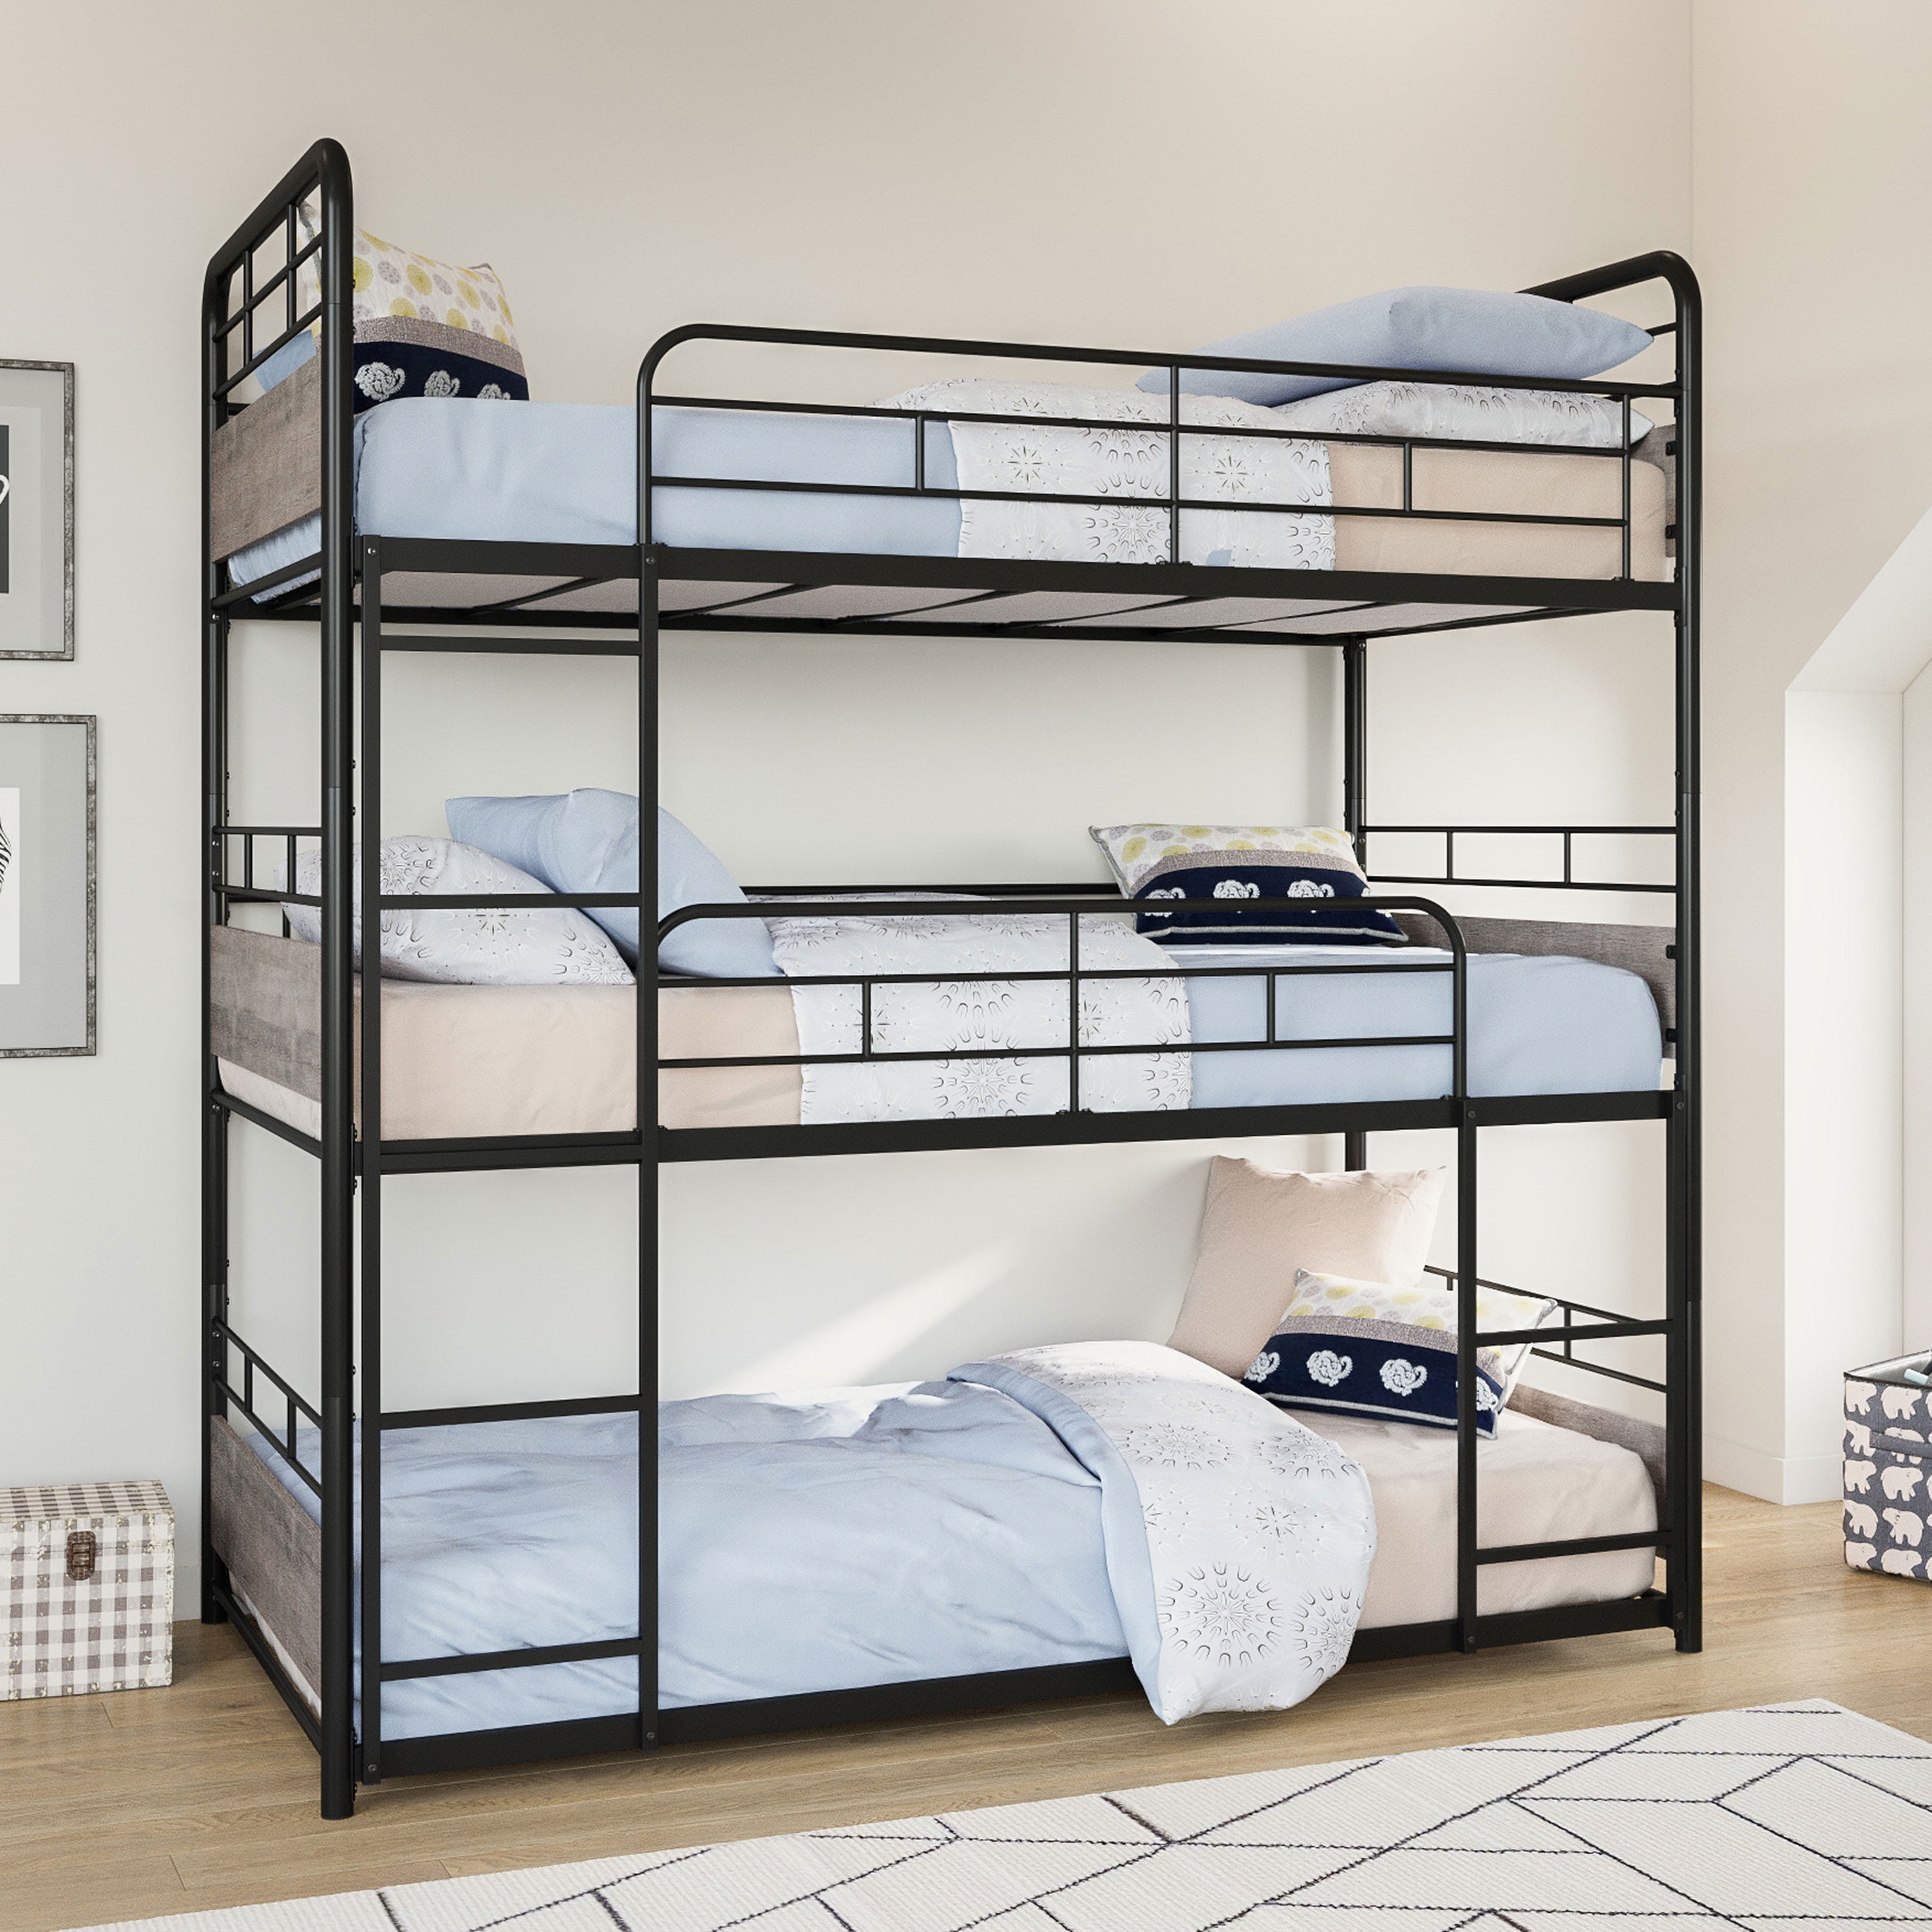 Better Homes Gardens Anniston Triple, Triple Bunk Beds For Small Rooms